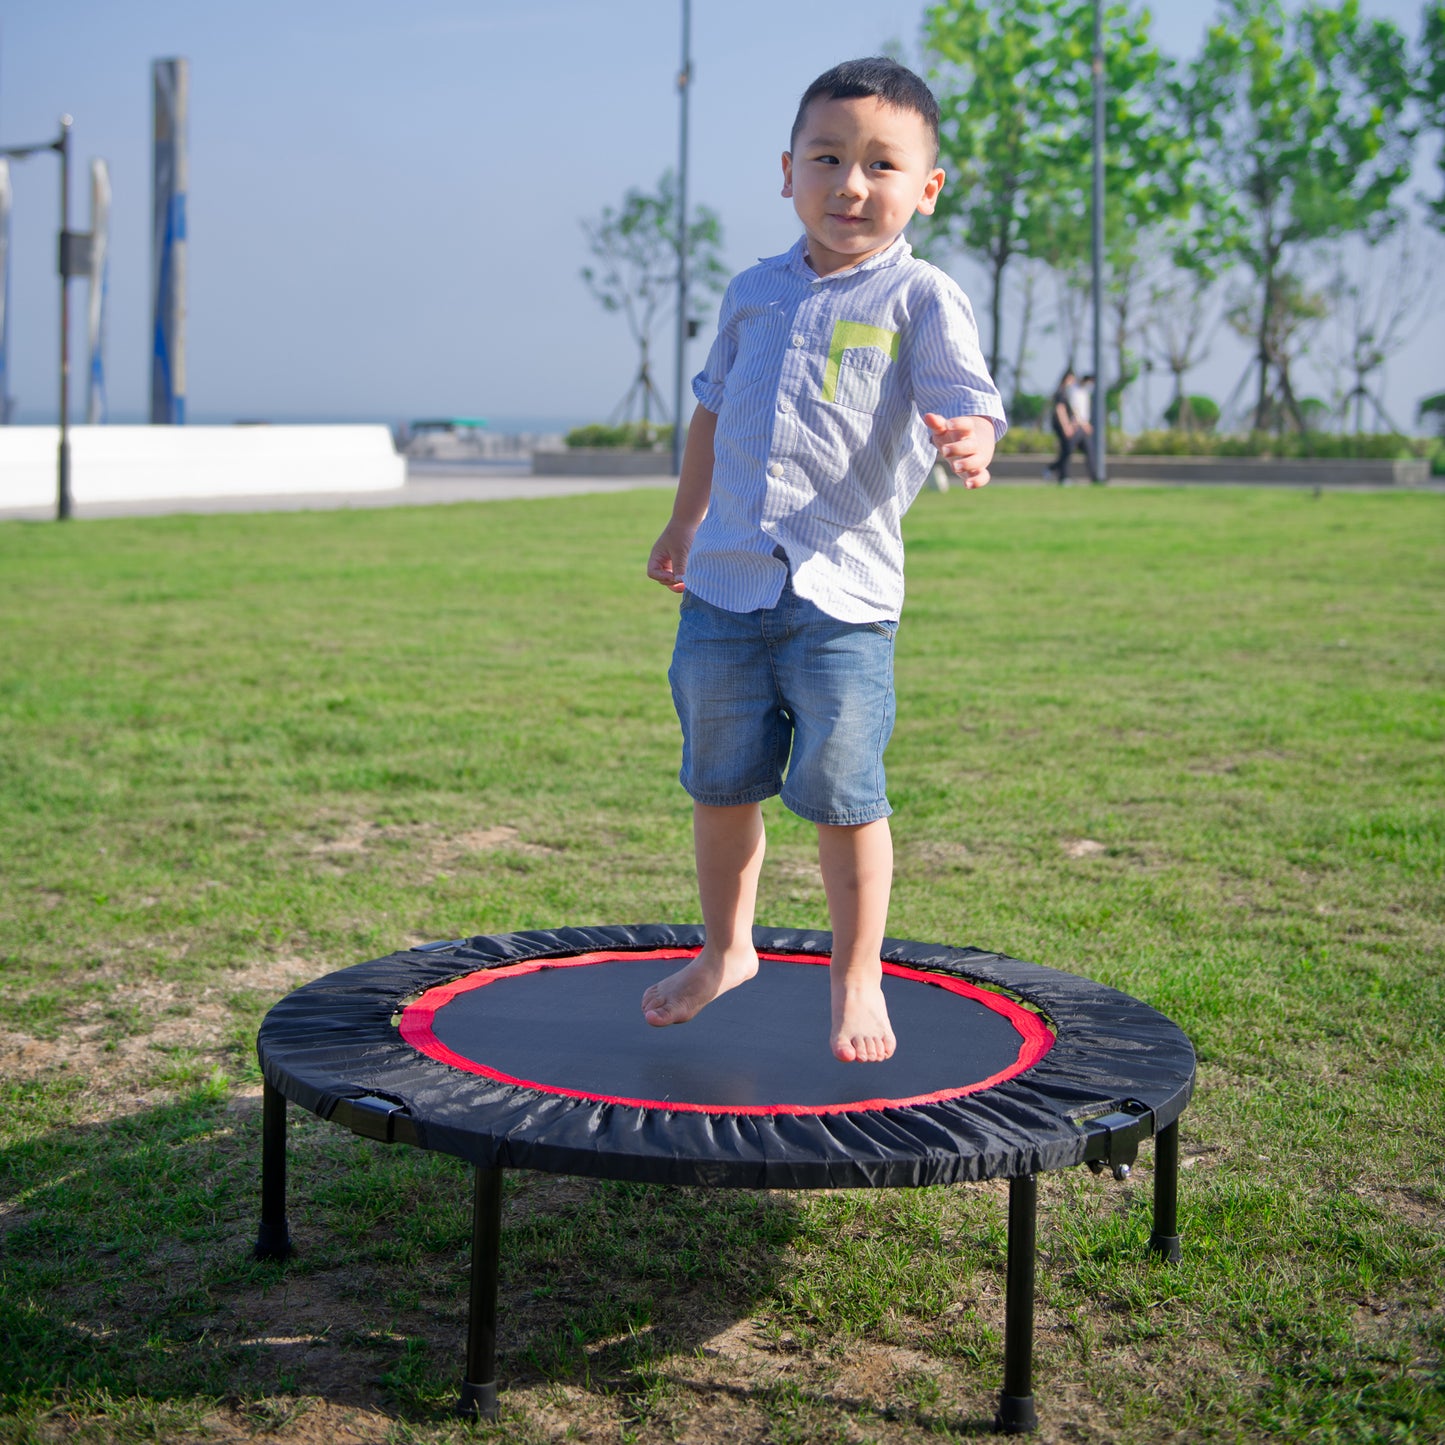 40 Inch Mini Exercise Trampoline for Adults or Kids - Indoor Fitness Rebounder Trampoline with Safety Pad | Max